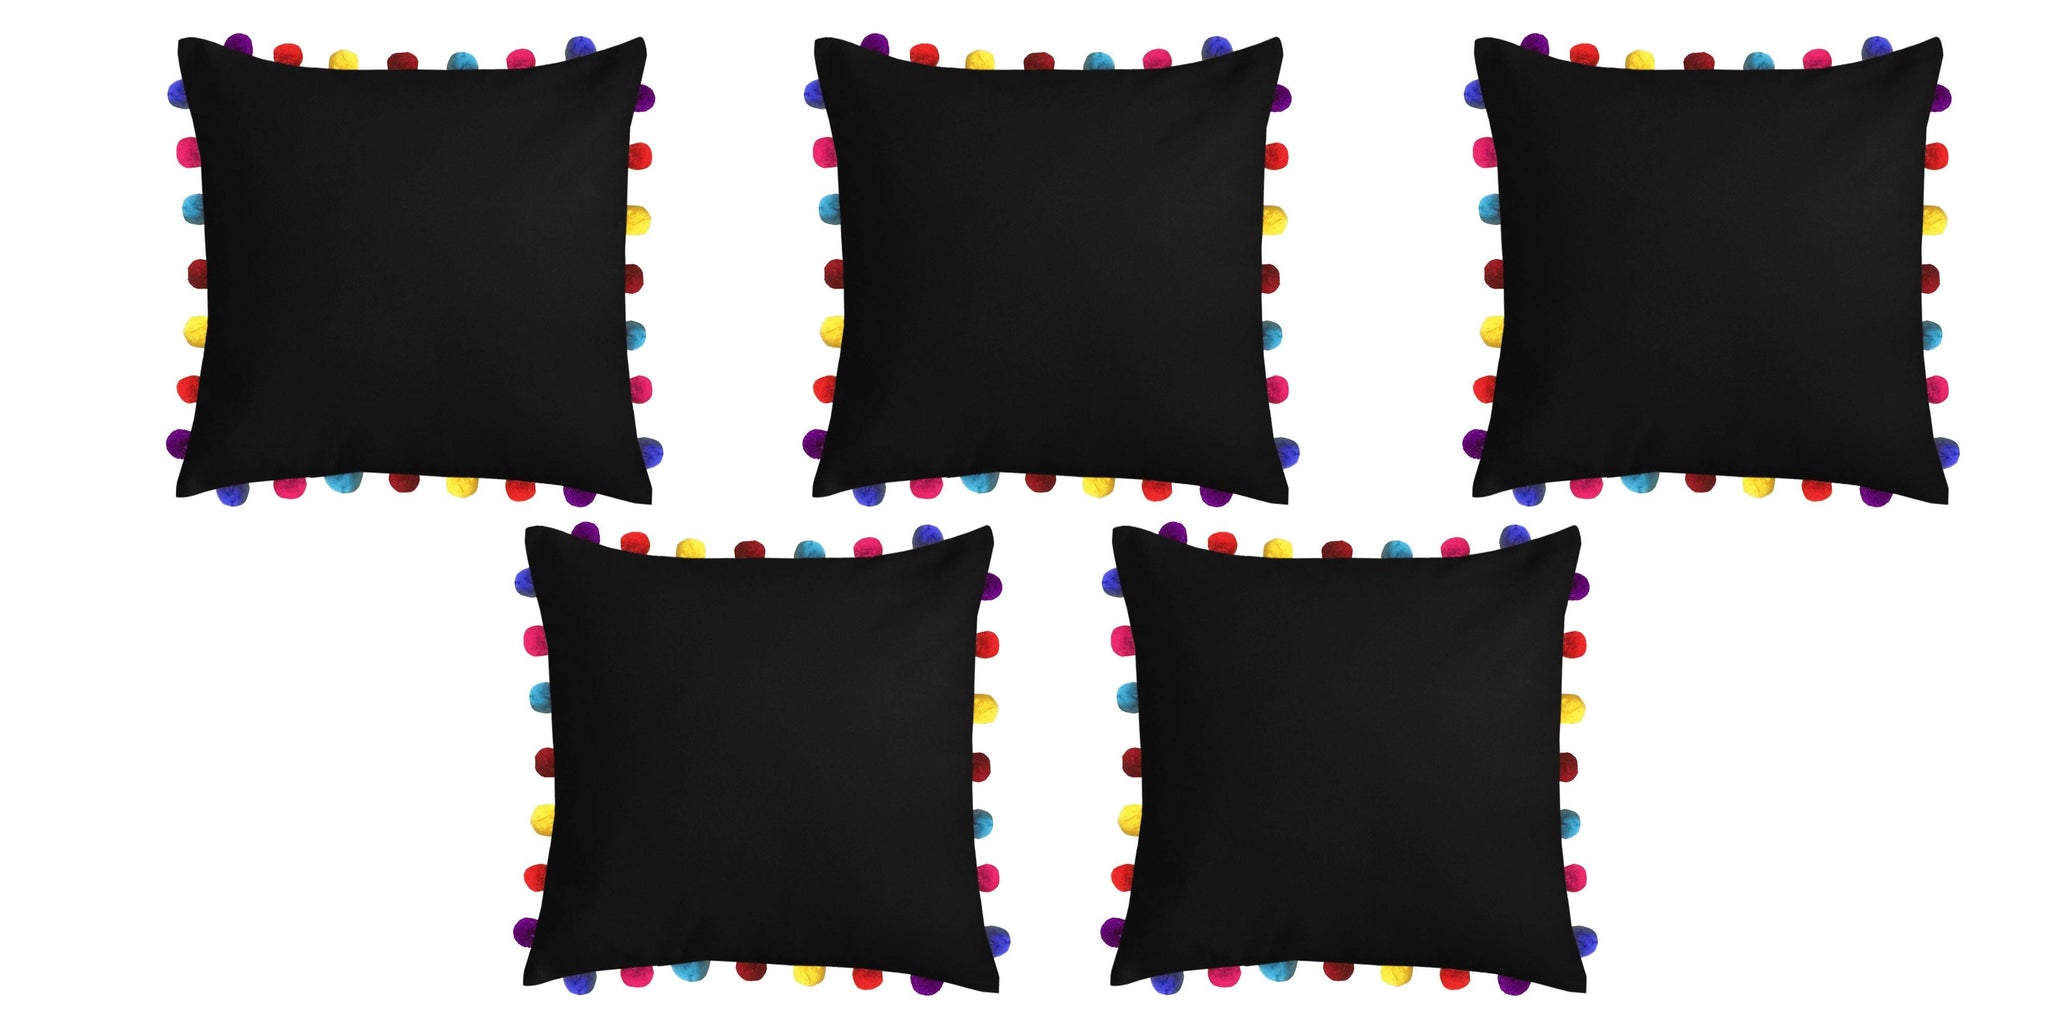 Lushomes Pirate Black Cushion Cover with Colorful Pom Poms (5 pcs, 20 x 20”) - Lushomes